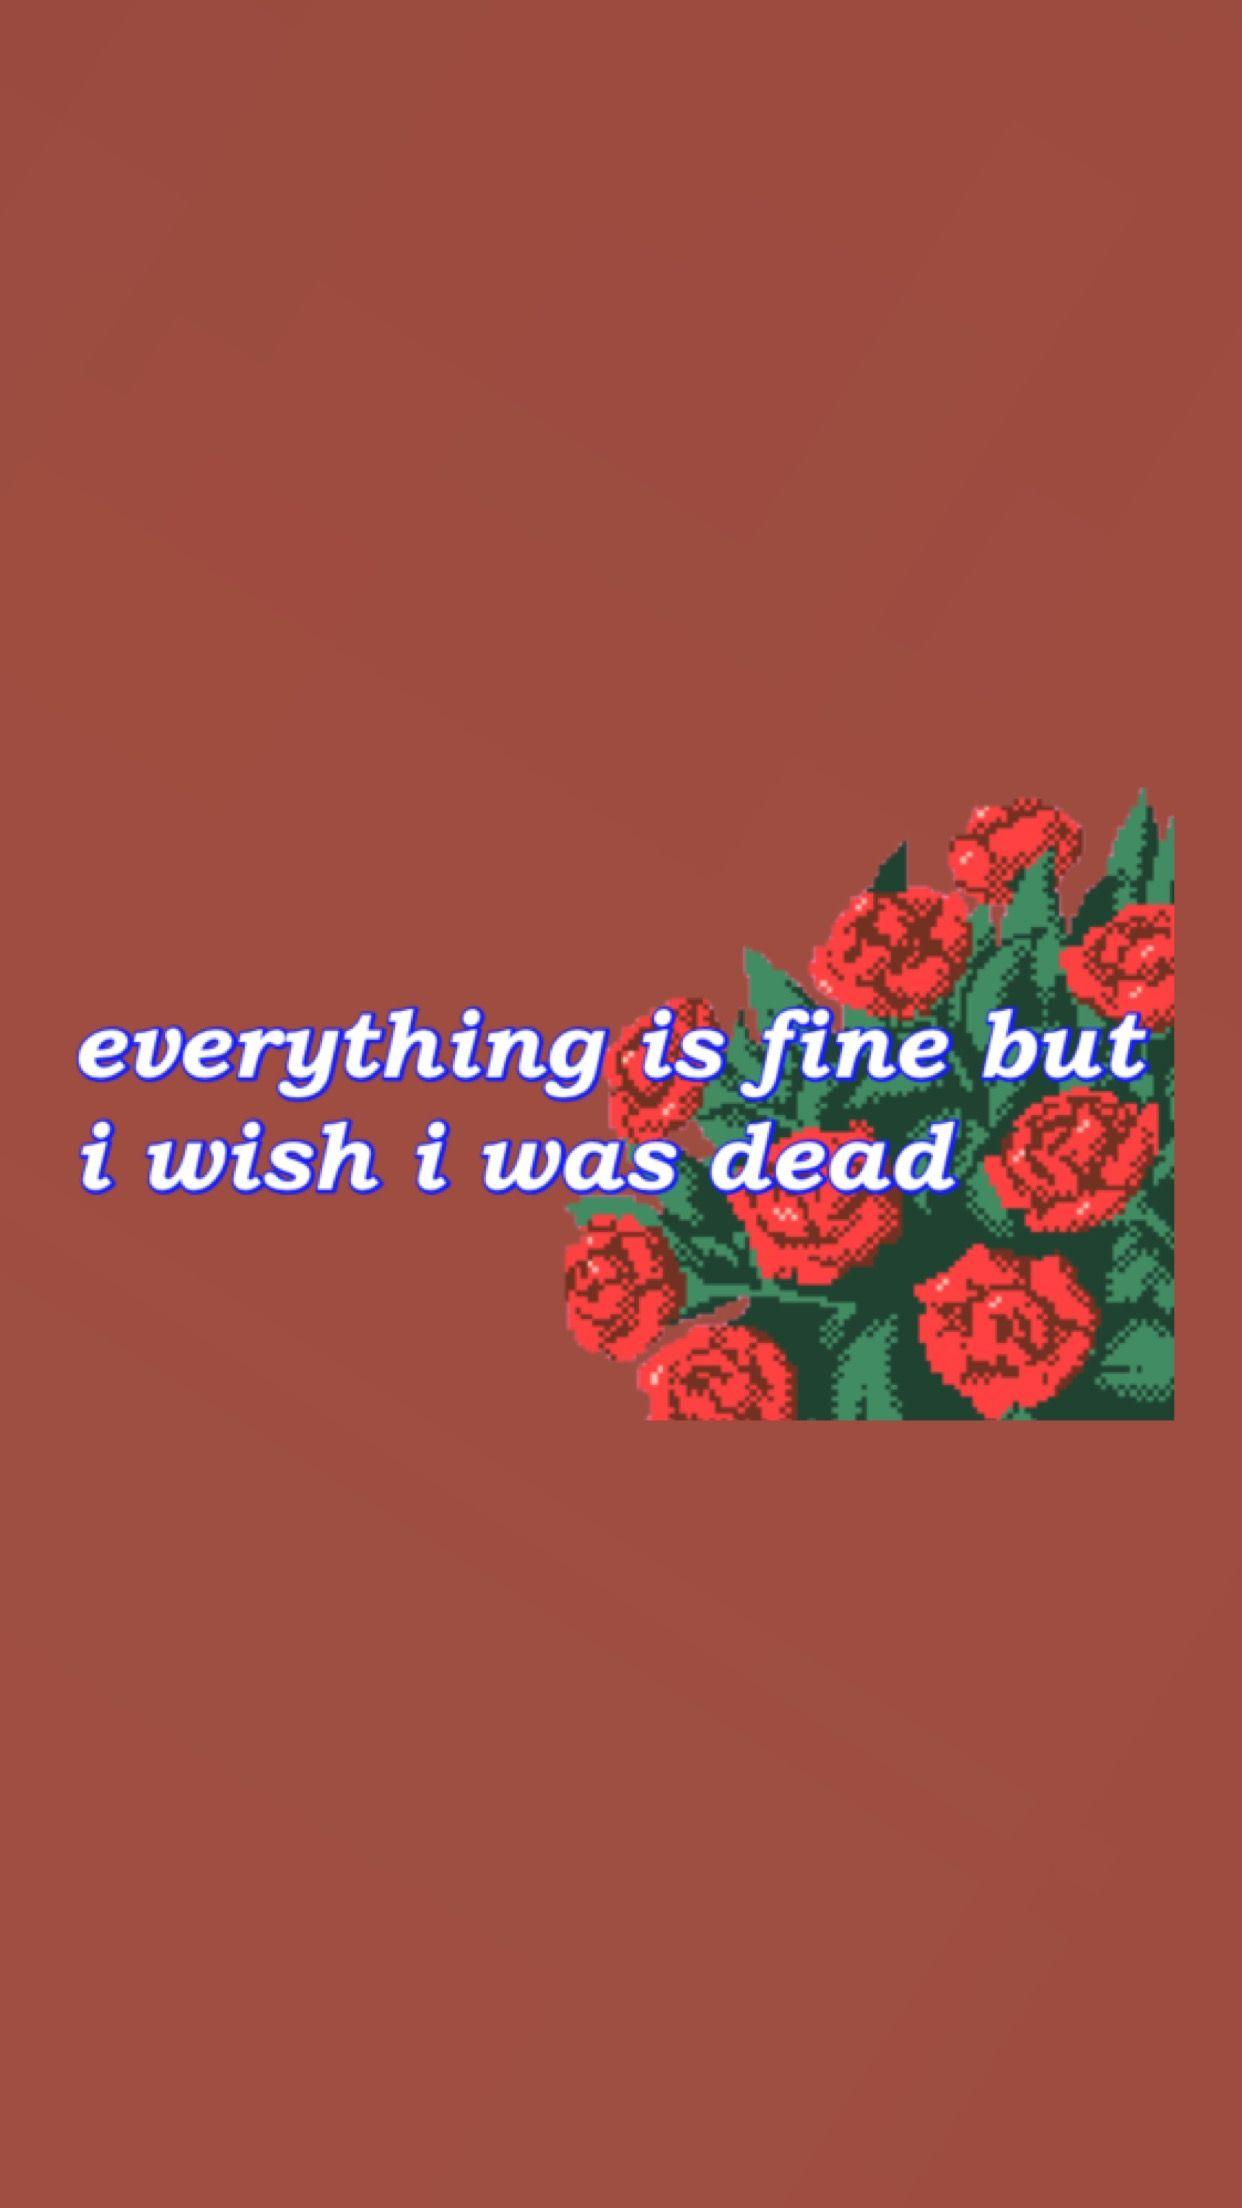 Everything is fine but i wish i was dead wallpaper